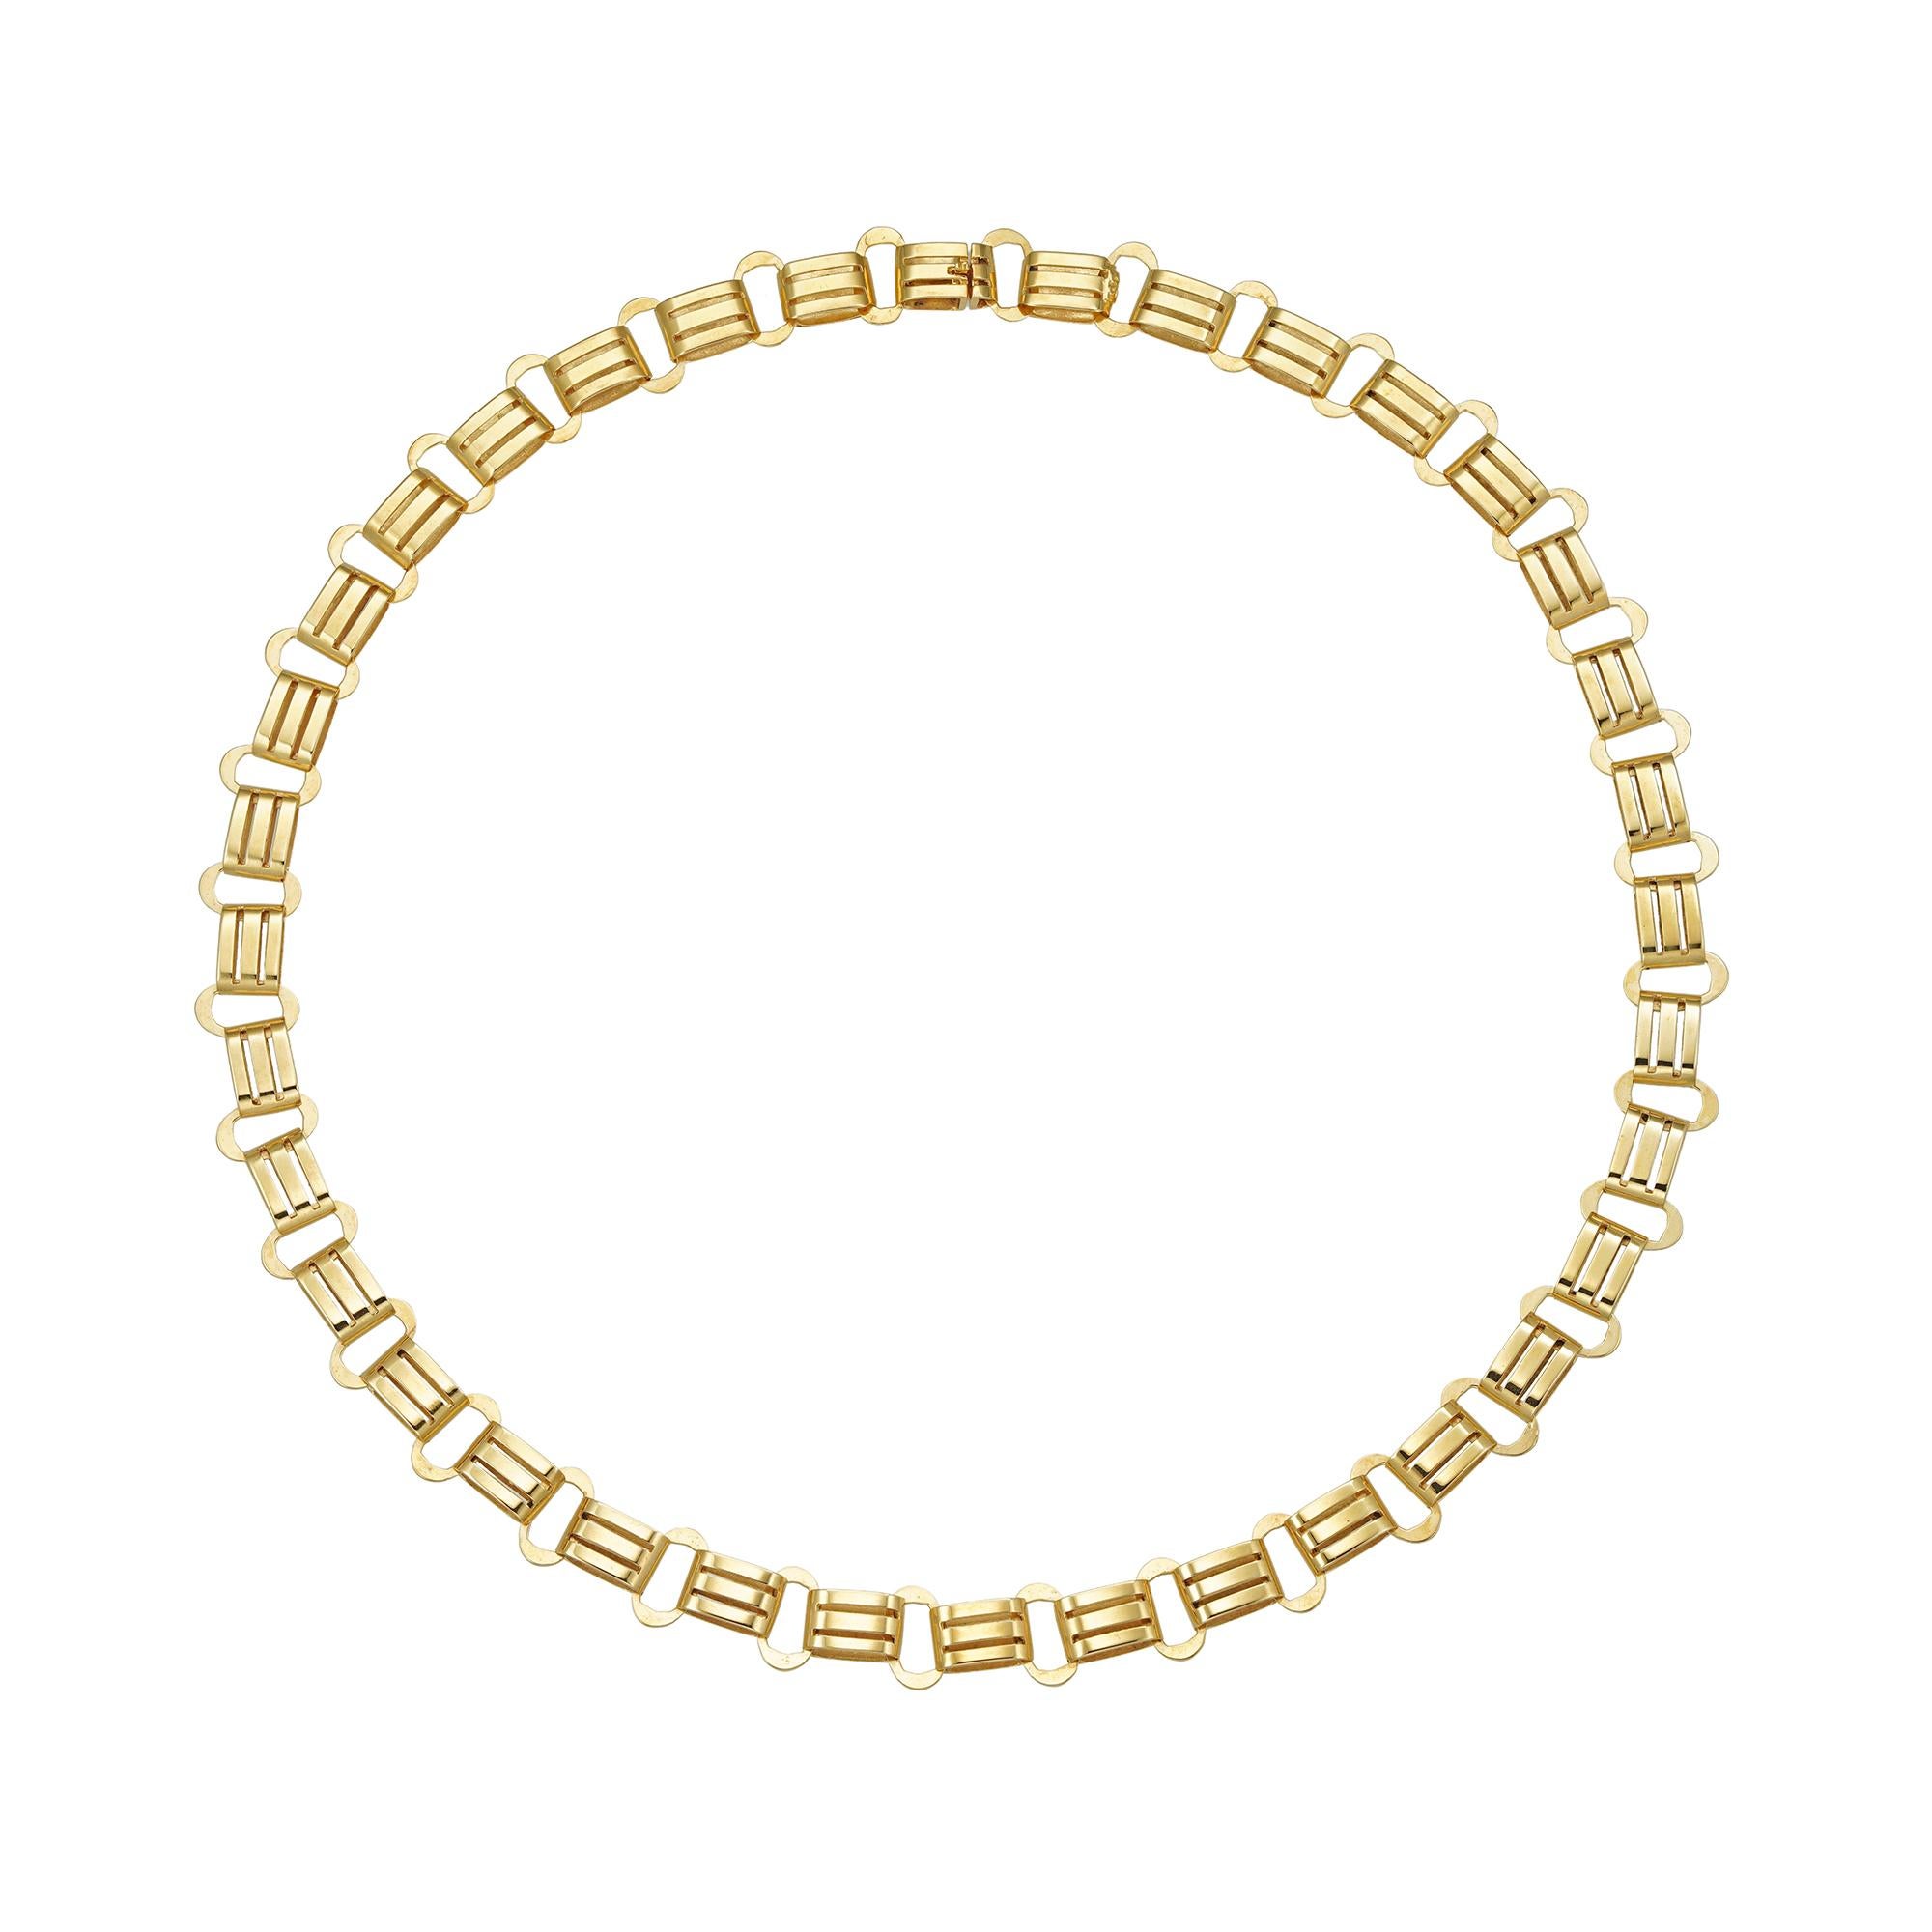 A late Victorian gold necklace, consisted of thirty-six oval shape links, connected with broader double-row pierced links, with  hidden clasp, made in 9ct gold, circa 1890, measuring approximately 38.5 x 0.9cm, gross weight 15.1 grams.

This antique